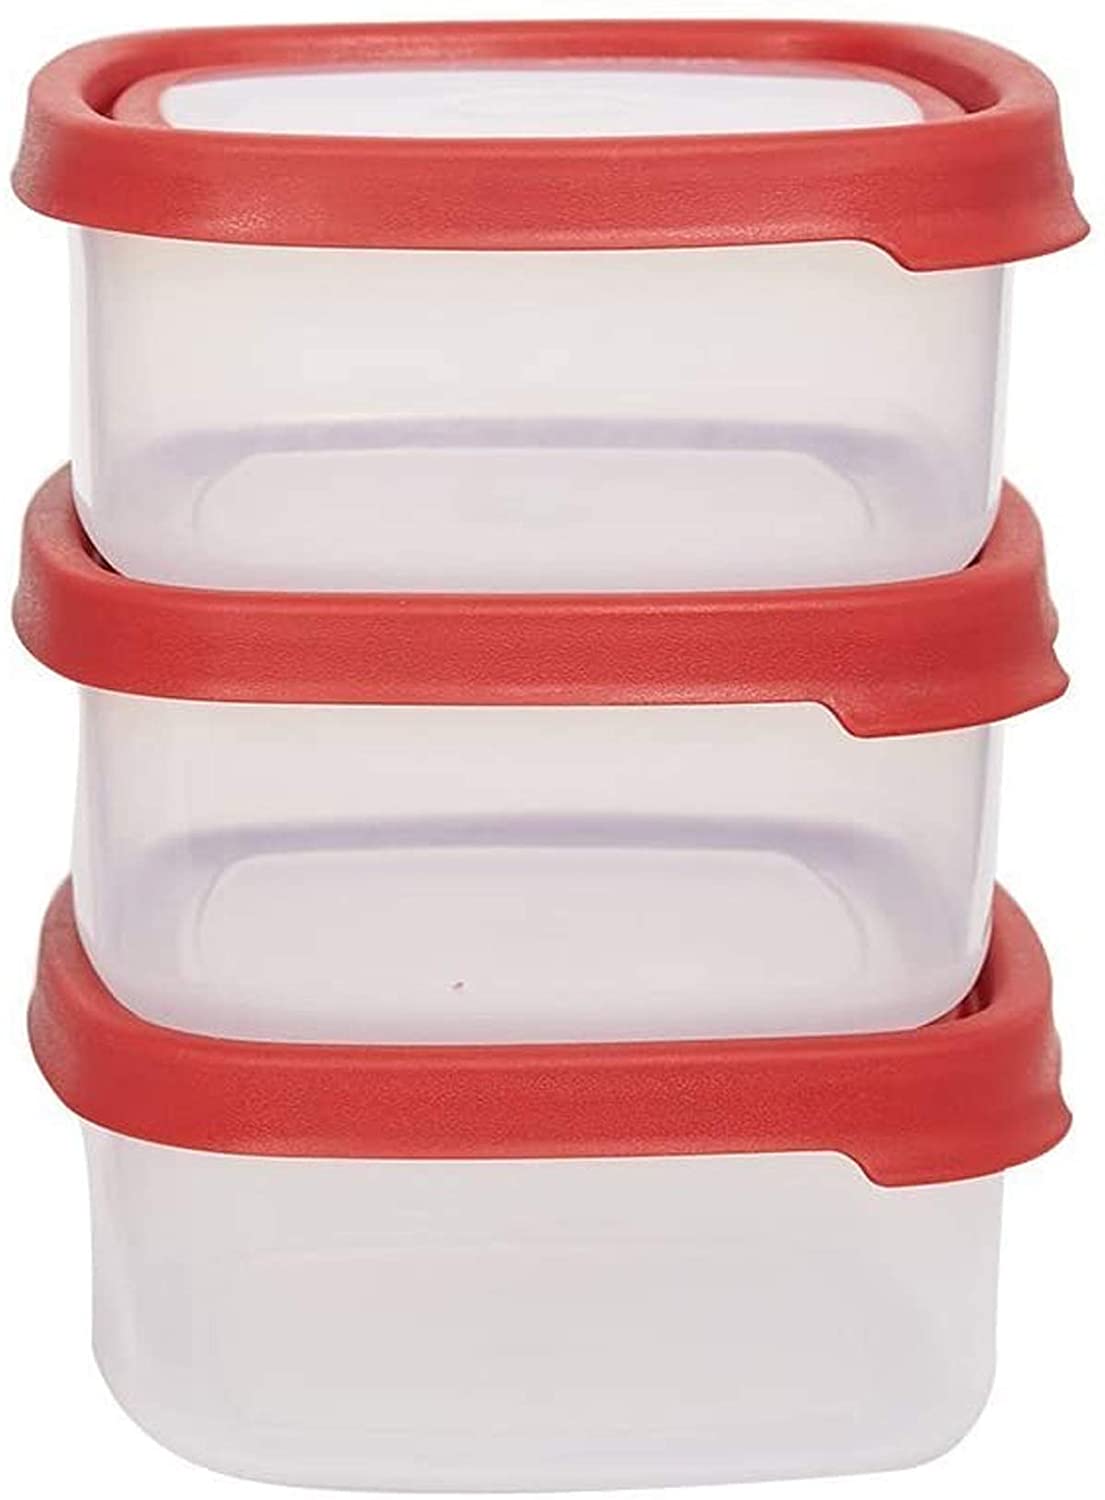 Wham 6 PCS Food Storage Containers With Lids Durable Plastic Containers Set - Airtight, Leakproof,BPA Free, Microwave, Freezer & Dishwasher Safe, Set of 3 (3.2 Cup)